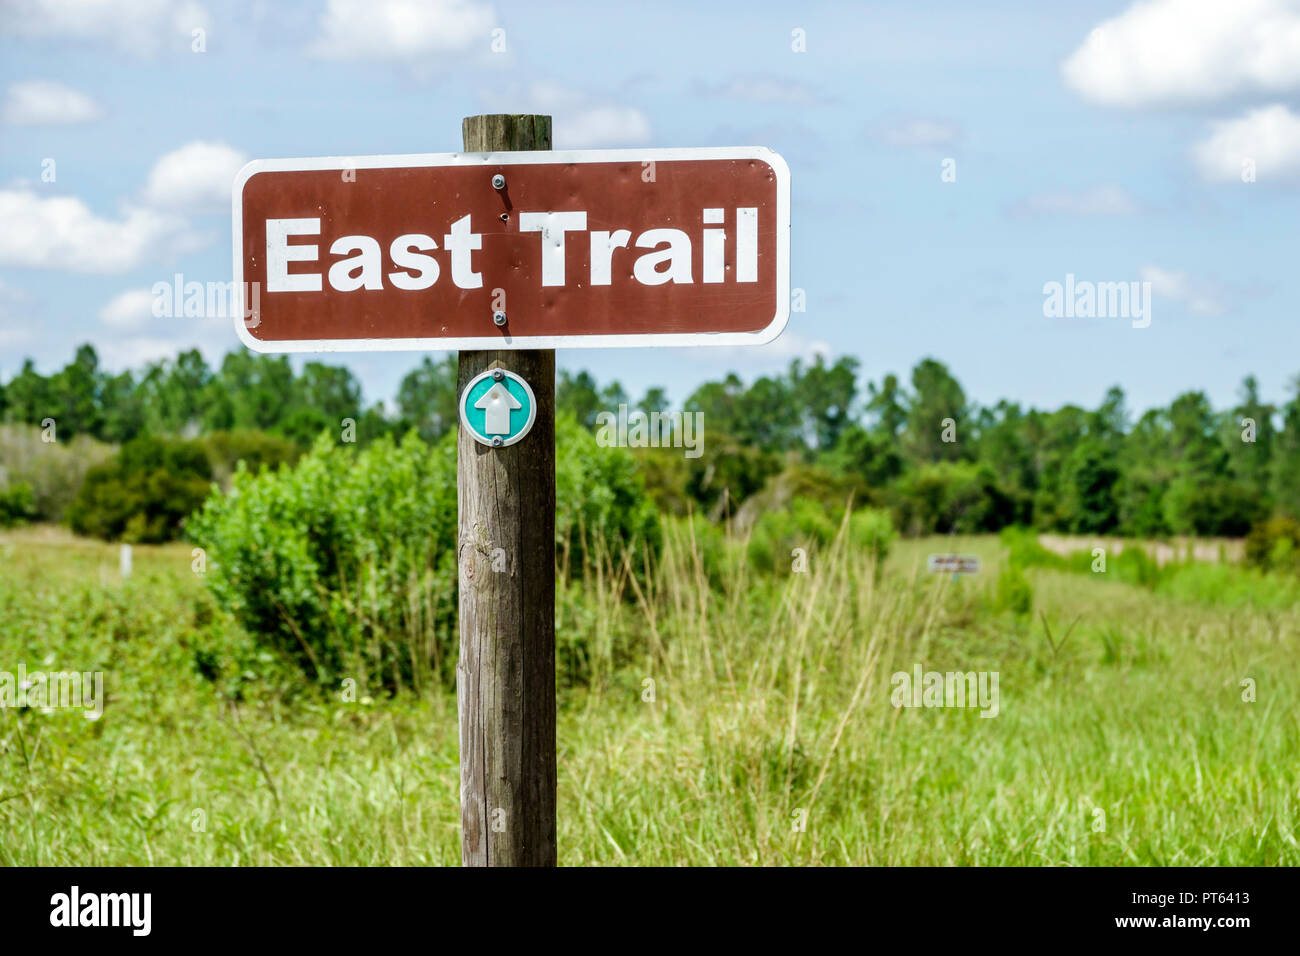 Florida,Lake Alfred,Hilochee Wildlife Management Area Osprey Unit,East Trail sign,nature natural,FL180731195 Stock Photo